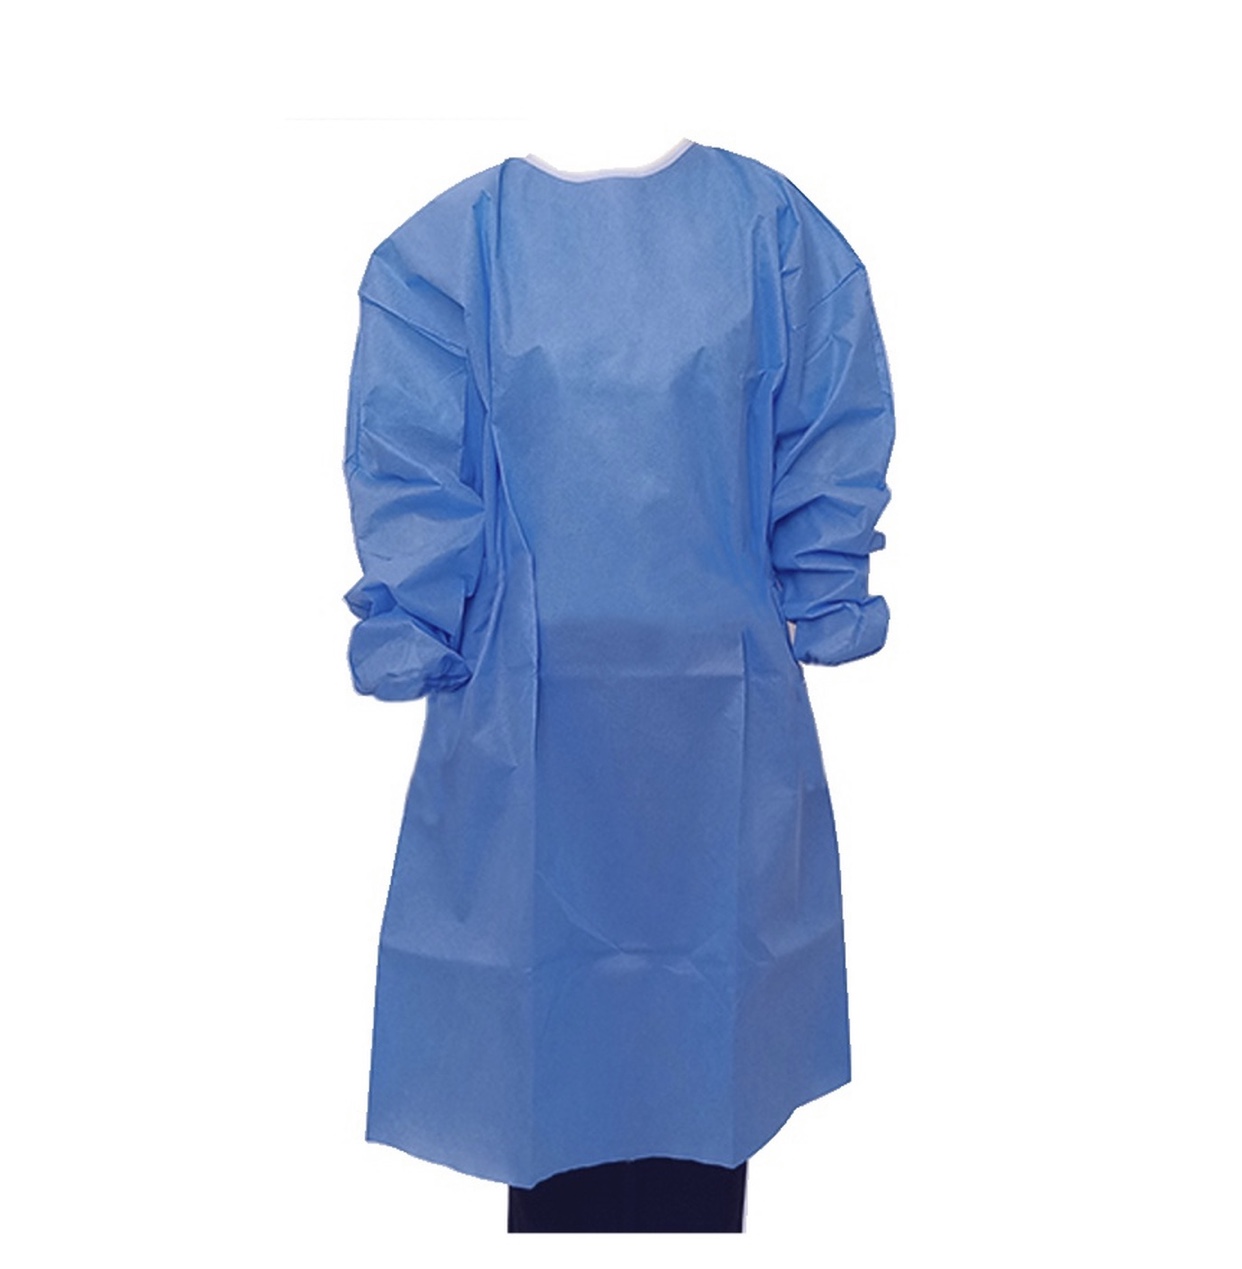 Microscope International Has The Best Disposable PPE Gowns